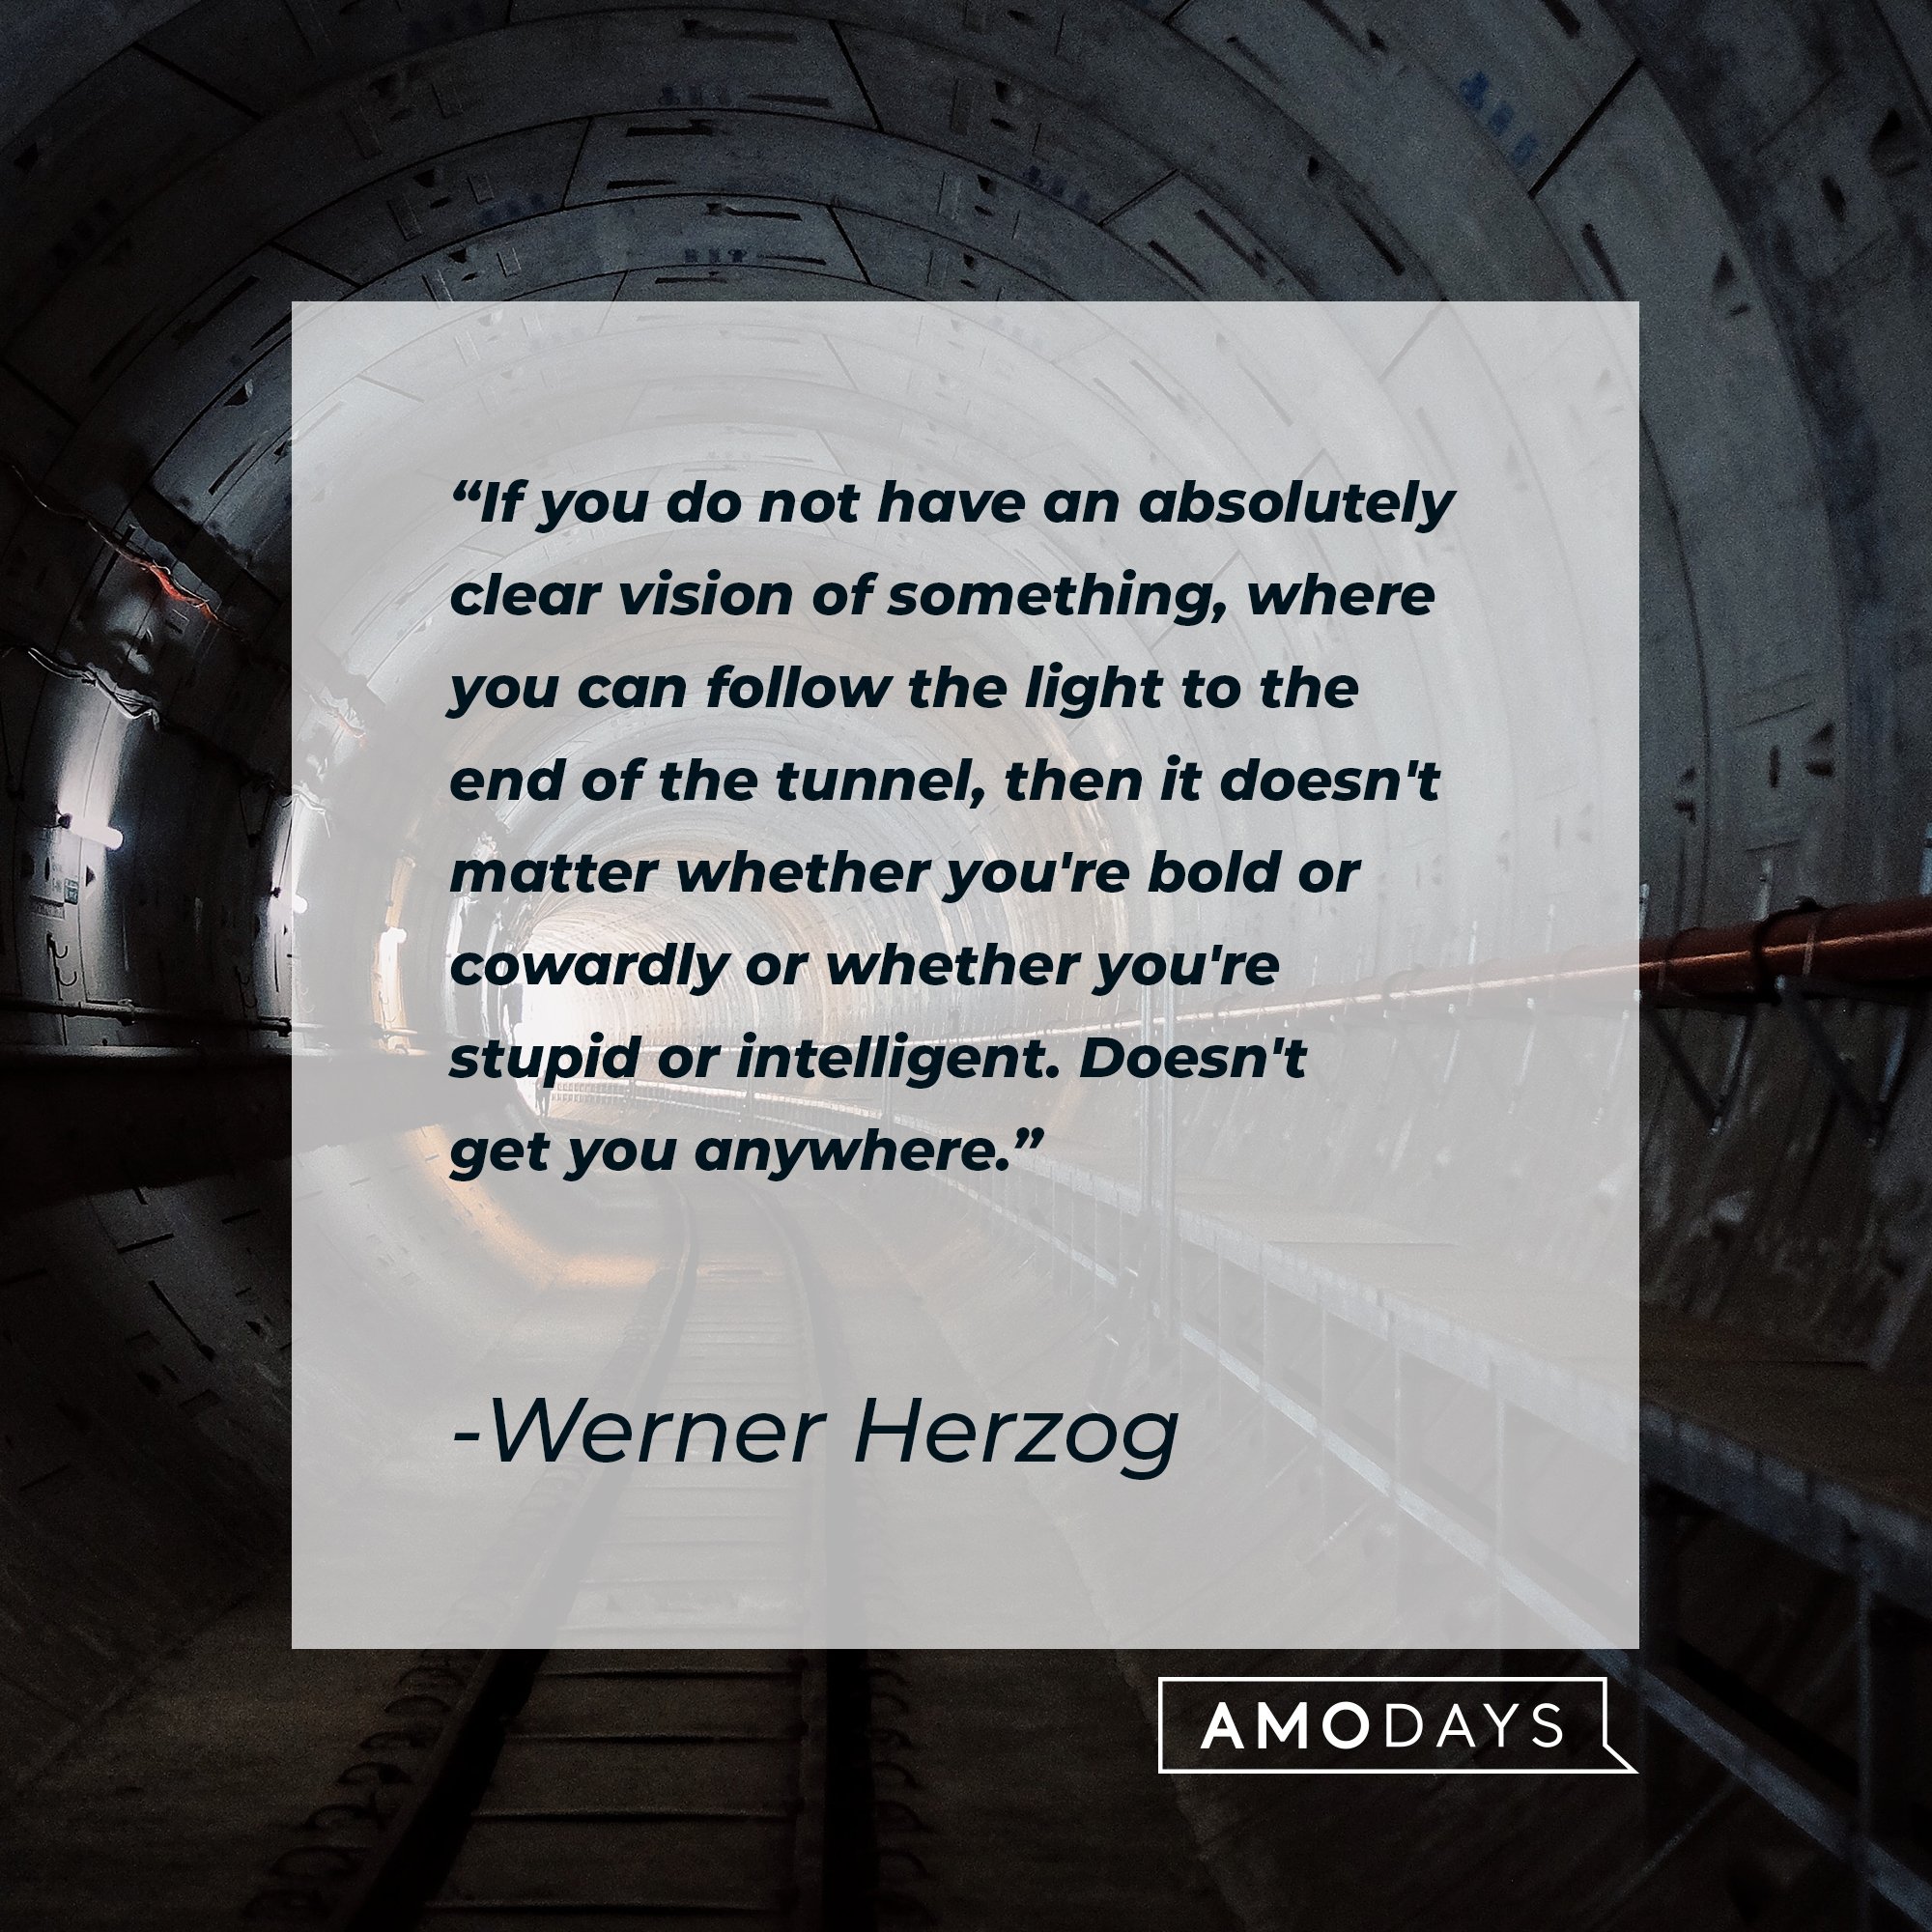 Werner Herzog’s quote: "If you do not have an absolutely clear vision of something, where you can follow the light to the end of the tunnel, then it doesn't matter whether you're bold or cowardly or whether you're stupid or intelligent. Doesn't get you anywhere." | Image: AmoDays